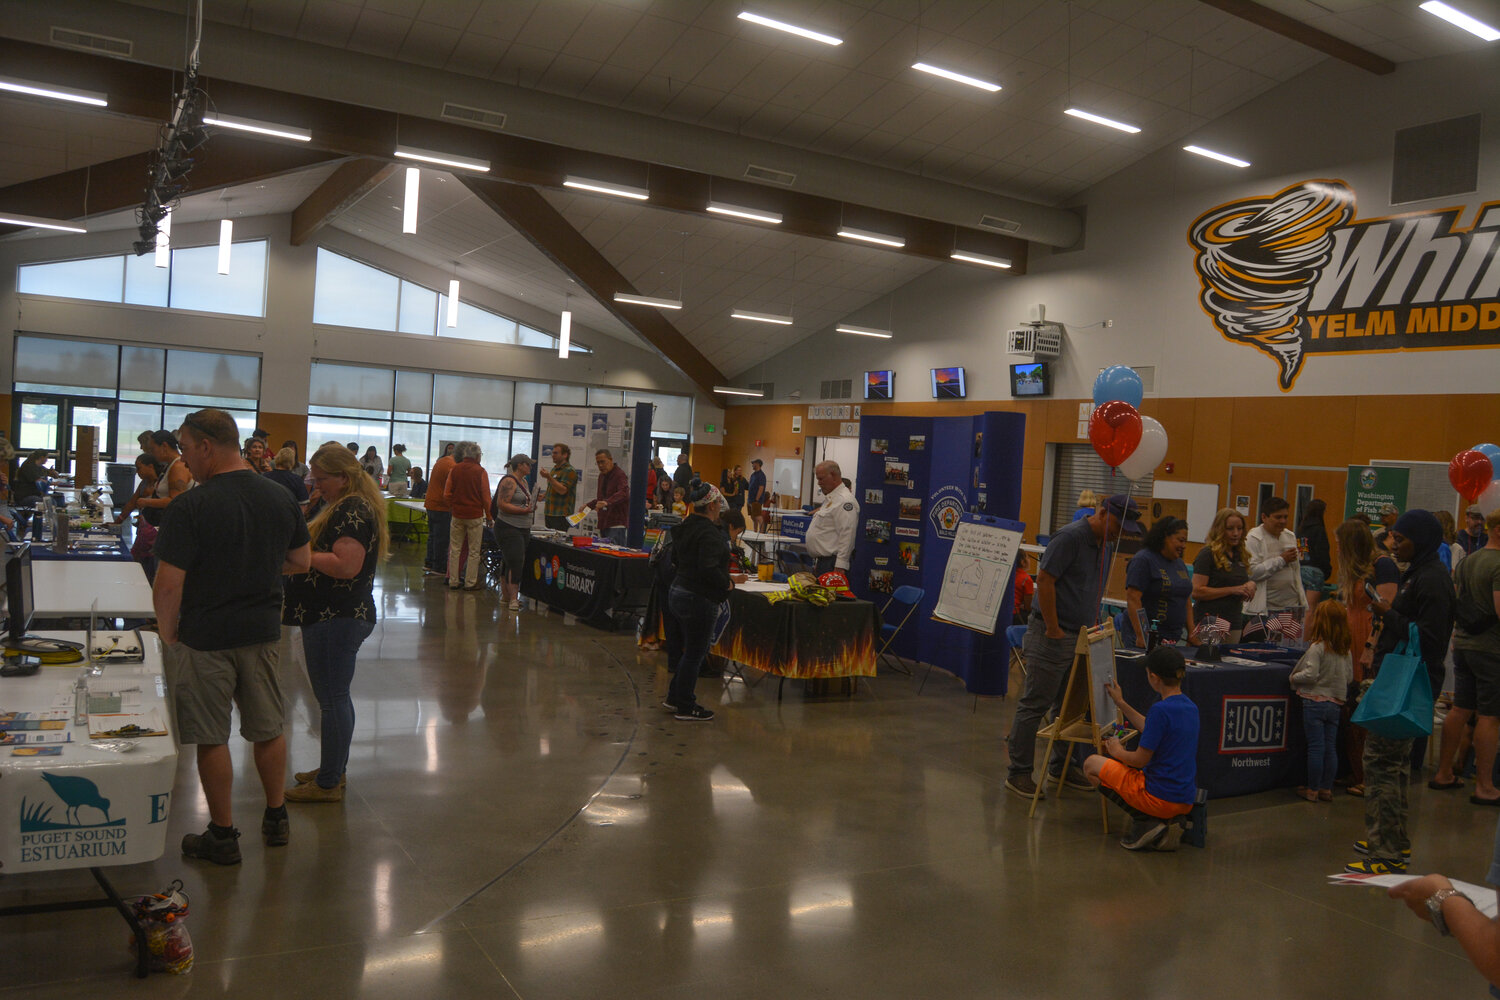 More than 20 community sponsors set up tables at STEMKAMP Family Day in the Yelm Middle School cafeteria on Aug. 11.